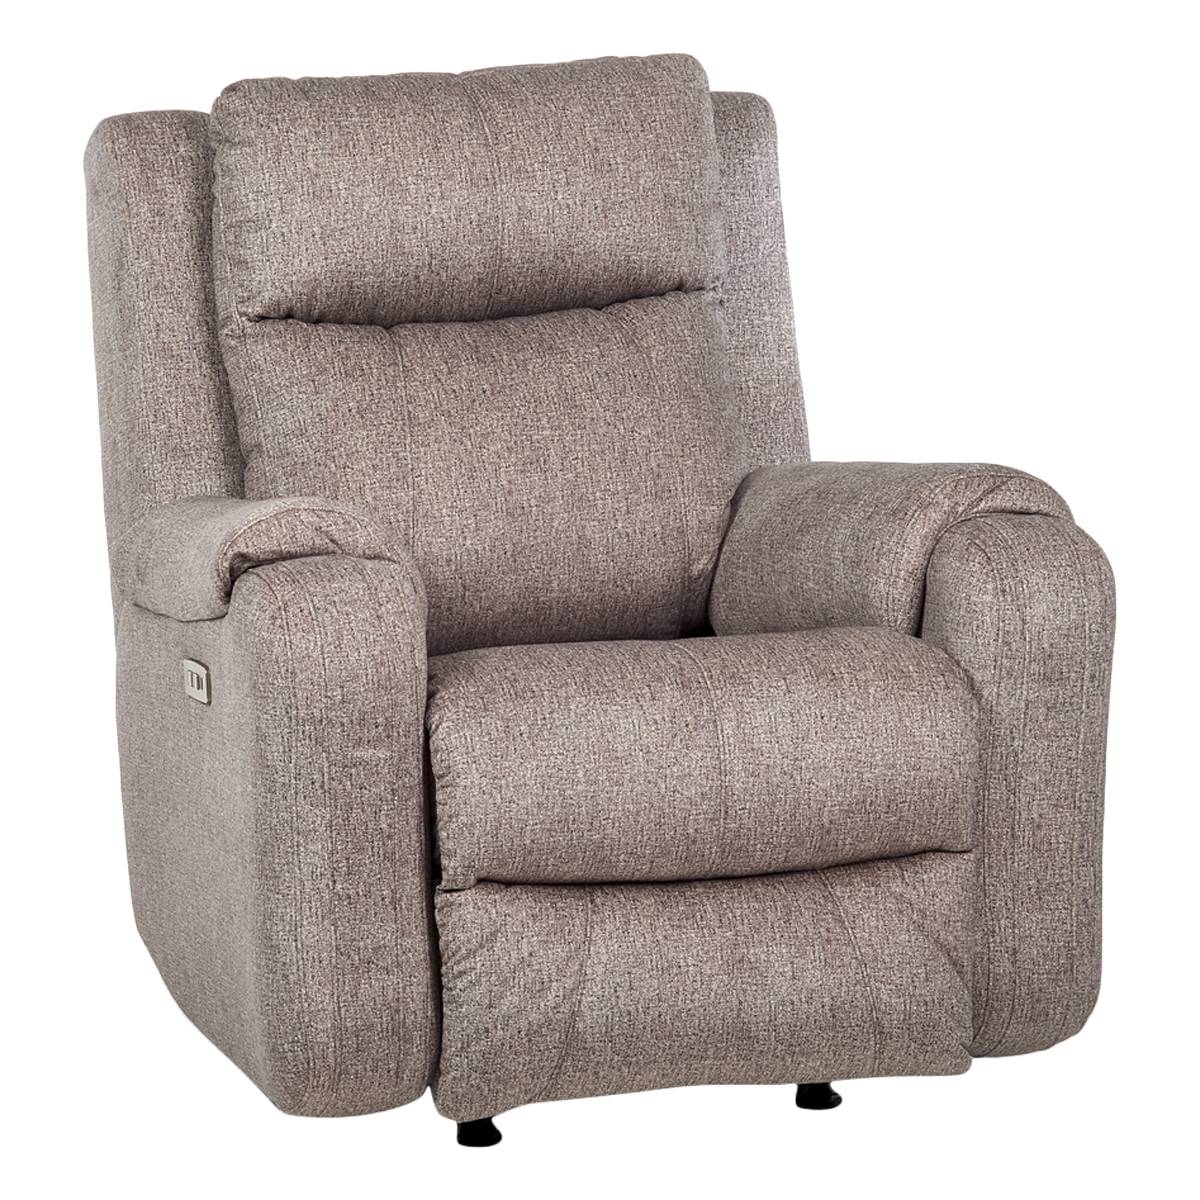 Southern Motion(tm) Driftwood Recliner